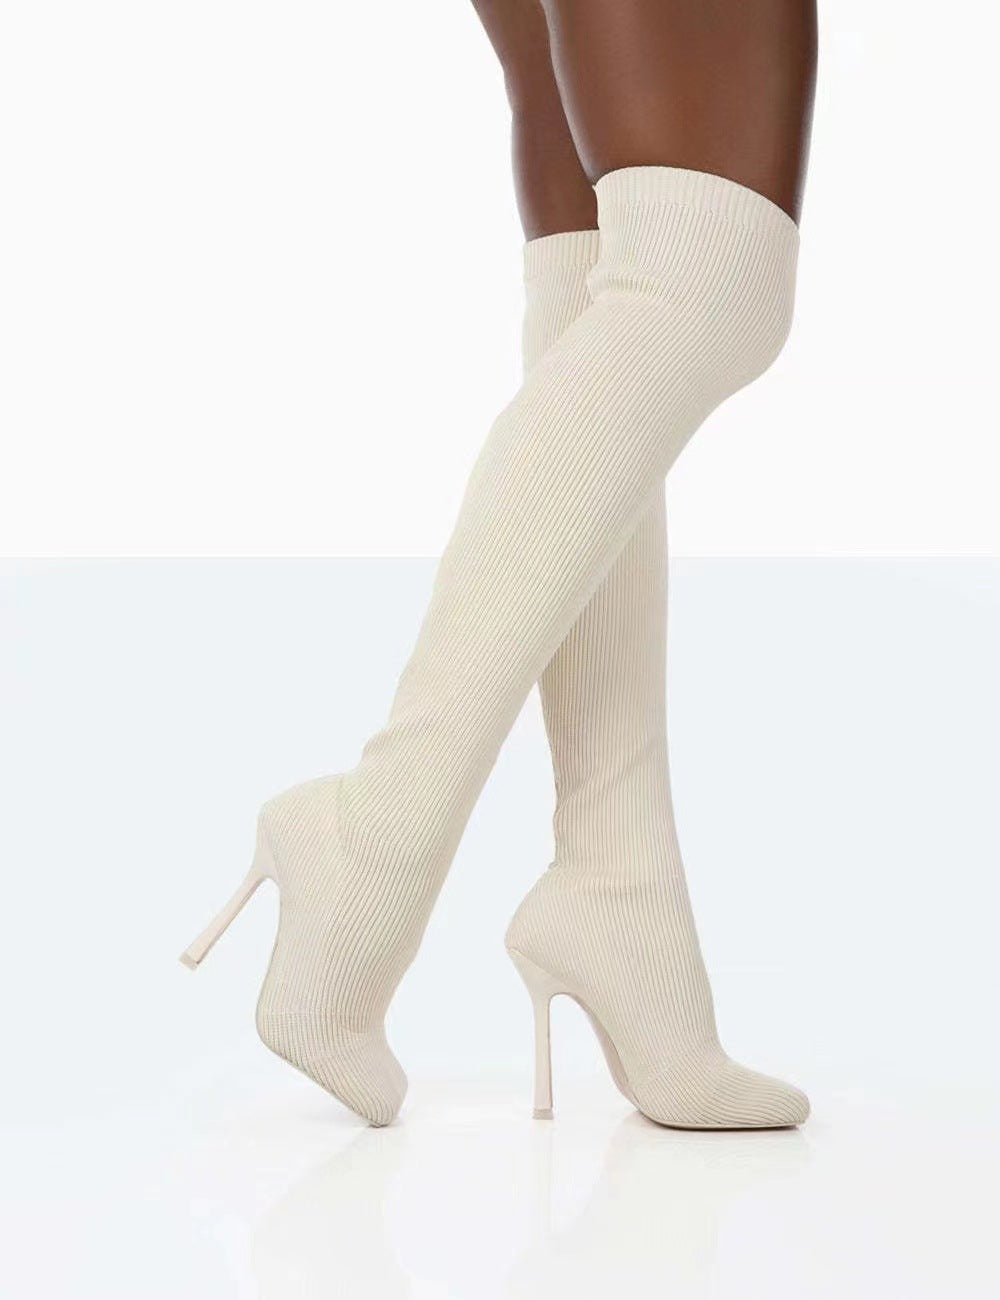 Heeled Boots  | Women's Over The Knee Long knitted heeled Boots | thecurvestory.myshopify.com